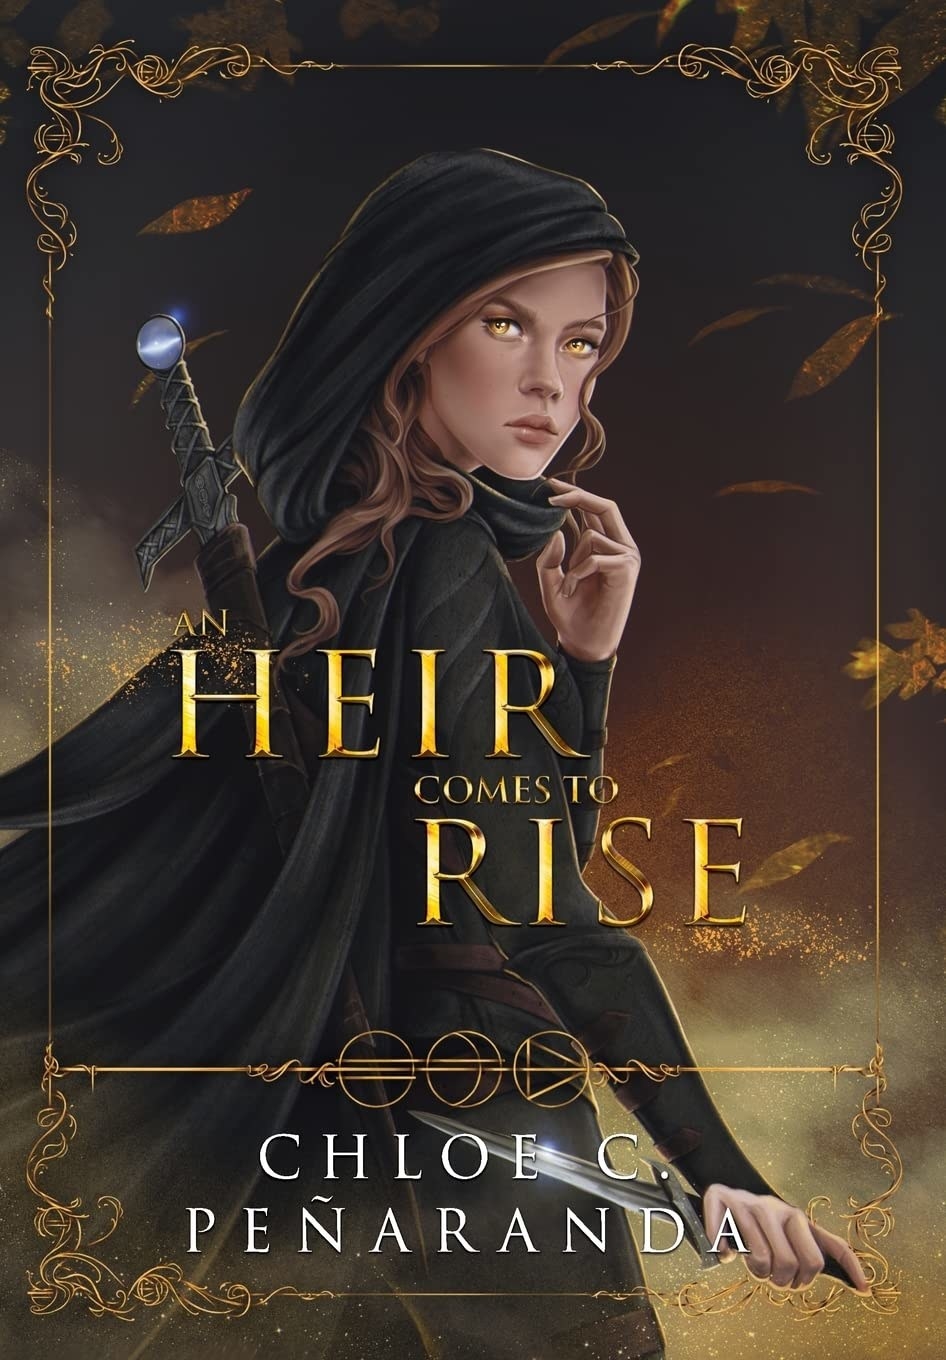 An Heir Comes to Rise book cover